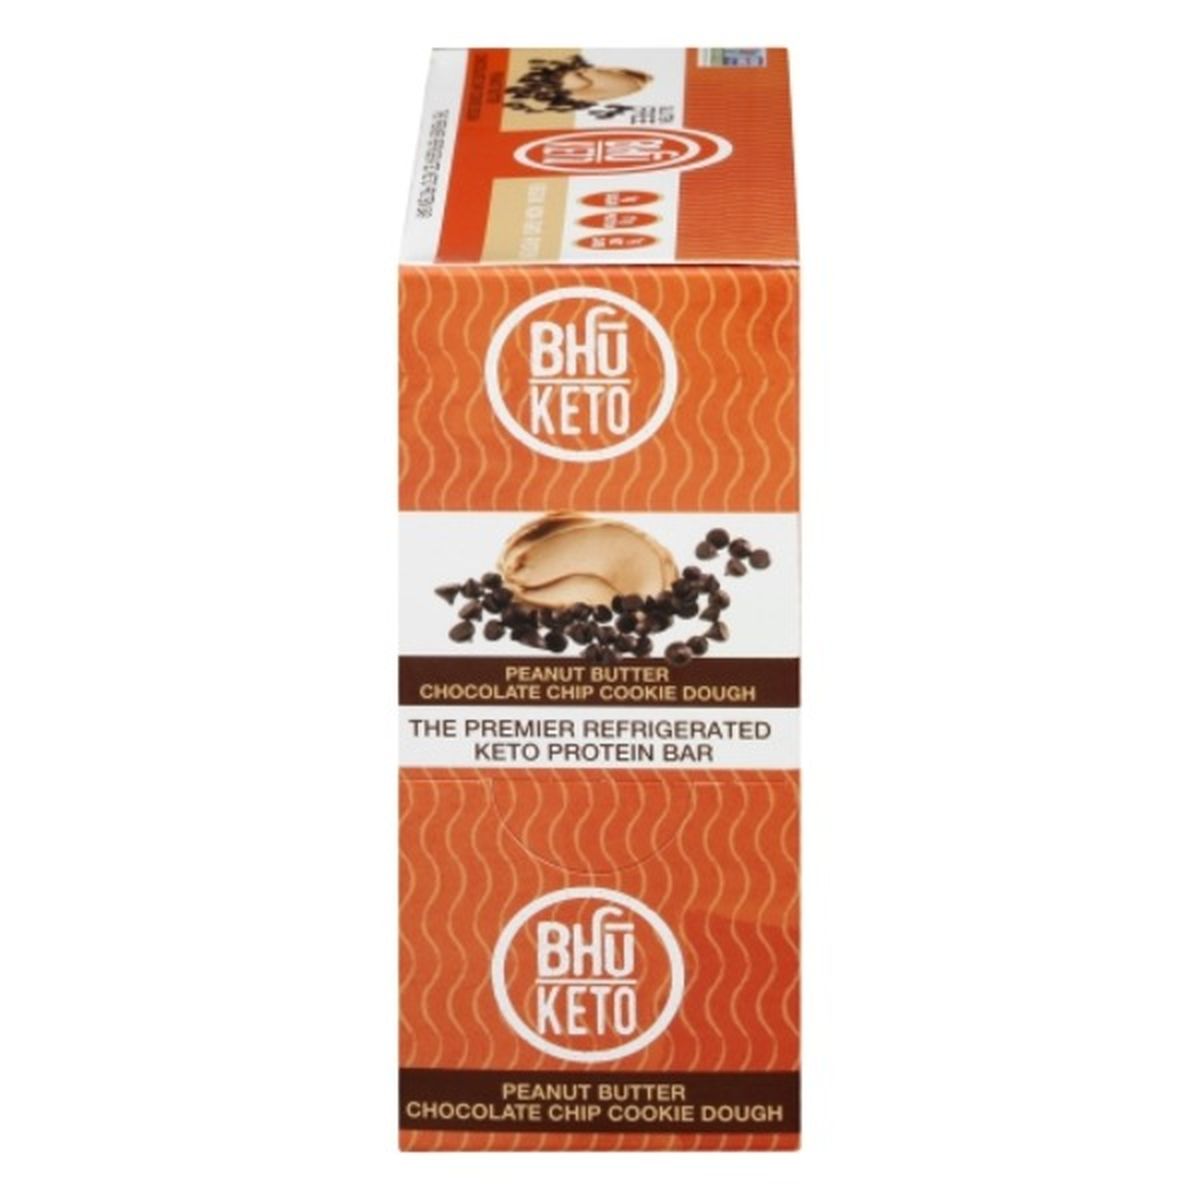 Calories in BHU Foods Protein Bar, Keto, Peanut Butter Chocolate Chip Cookie Dough